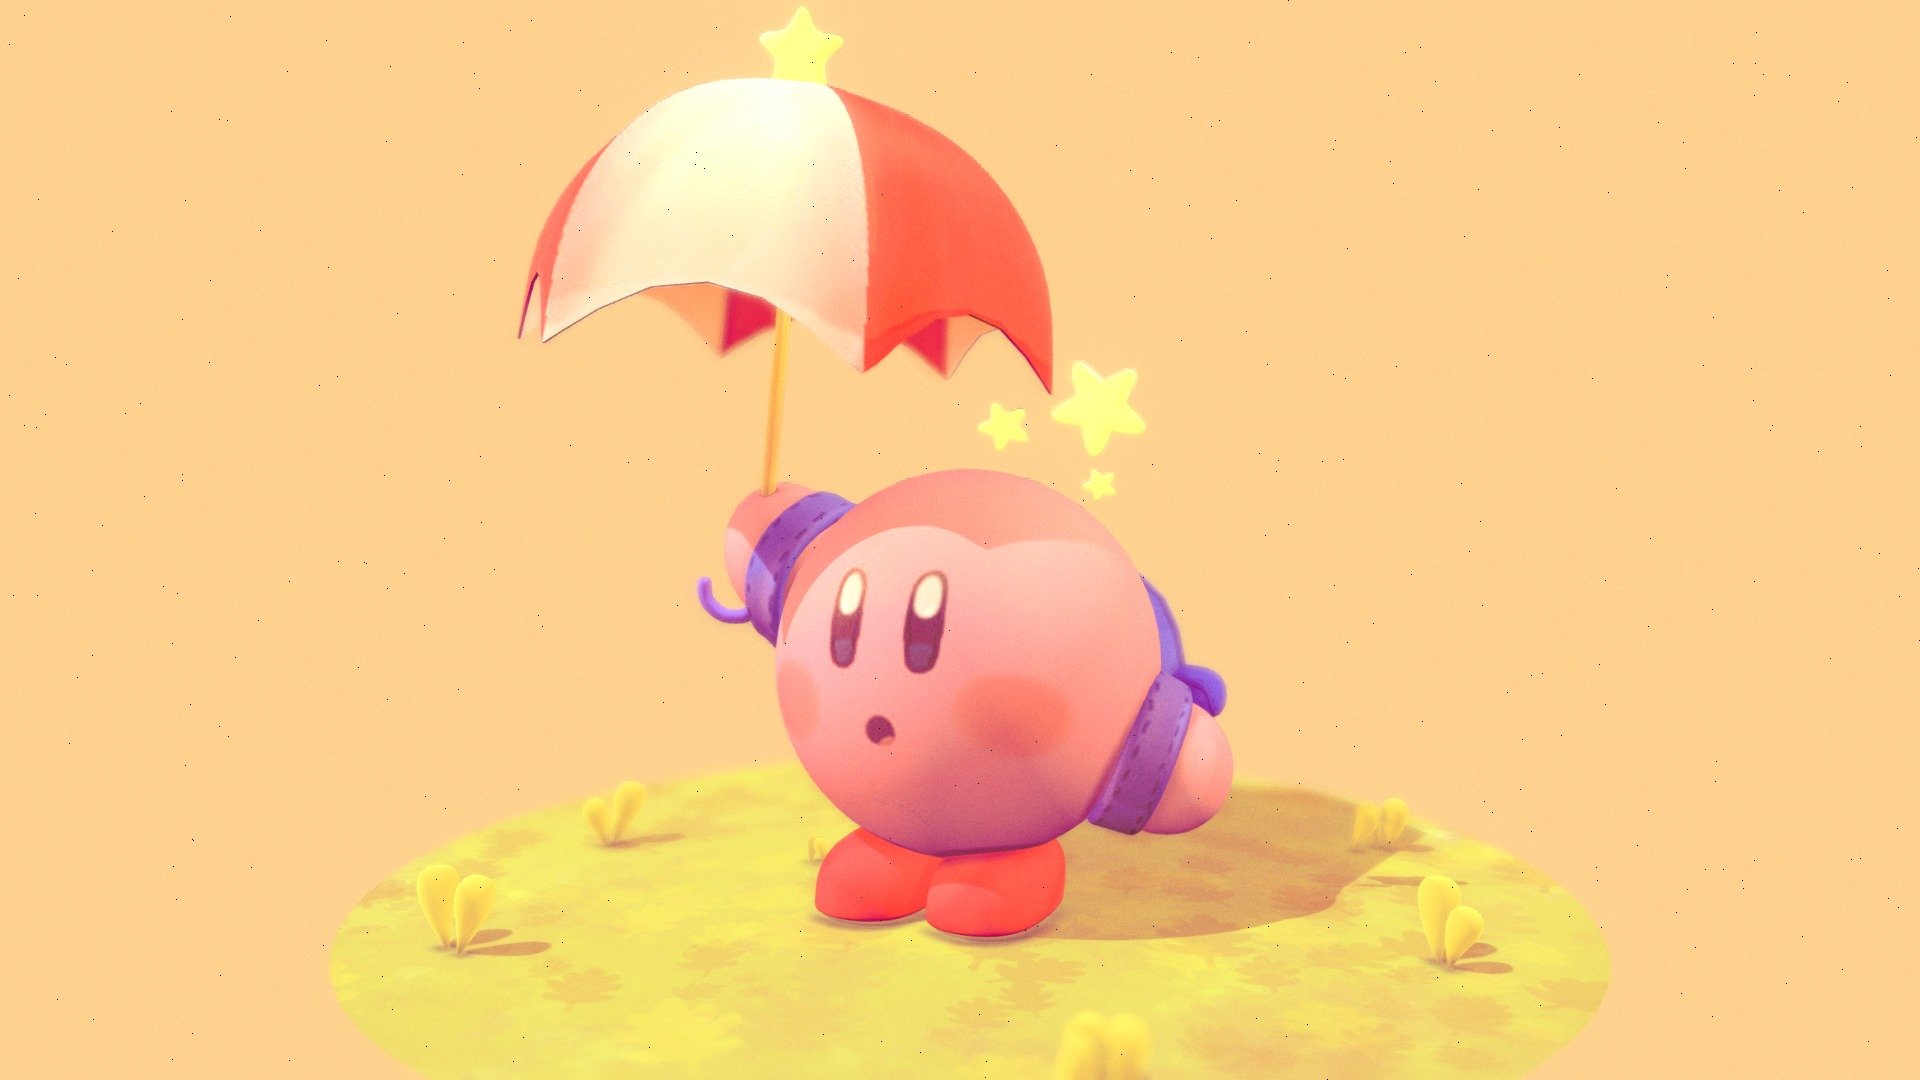 Looks like even 0.1% chance of rain won't stop Kirby from bringing an umbrella :) - Indecisive Kirby - 3D model by Imad Hassan (@imad.hassan) 3d model